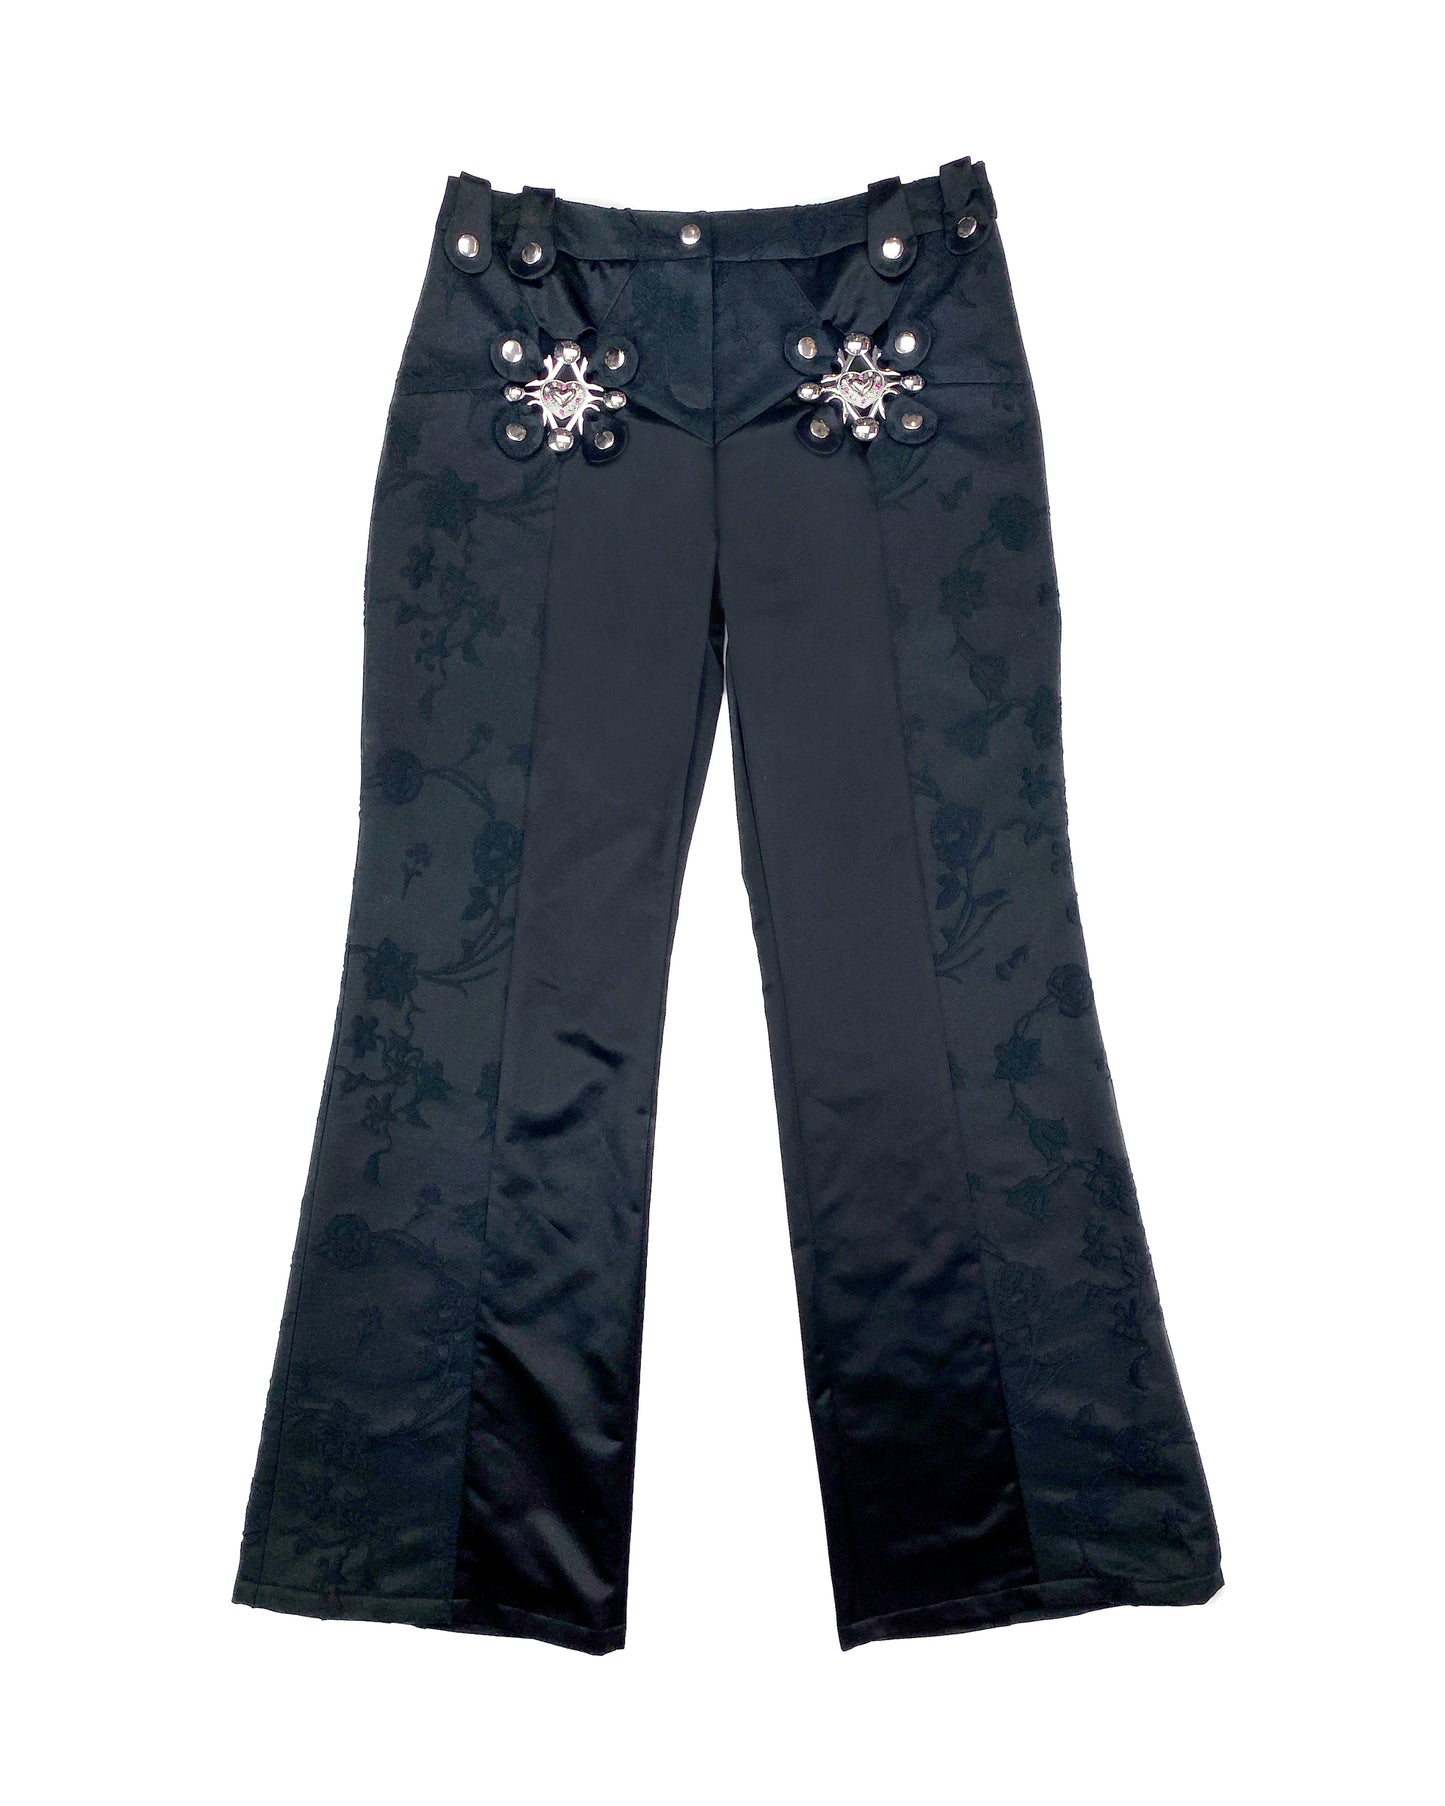 Bosky Trousers